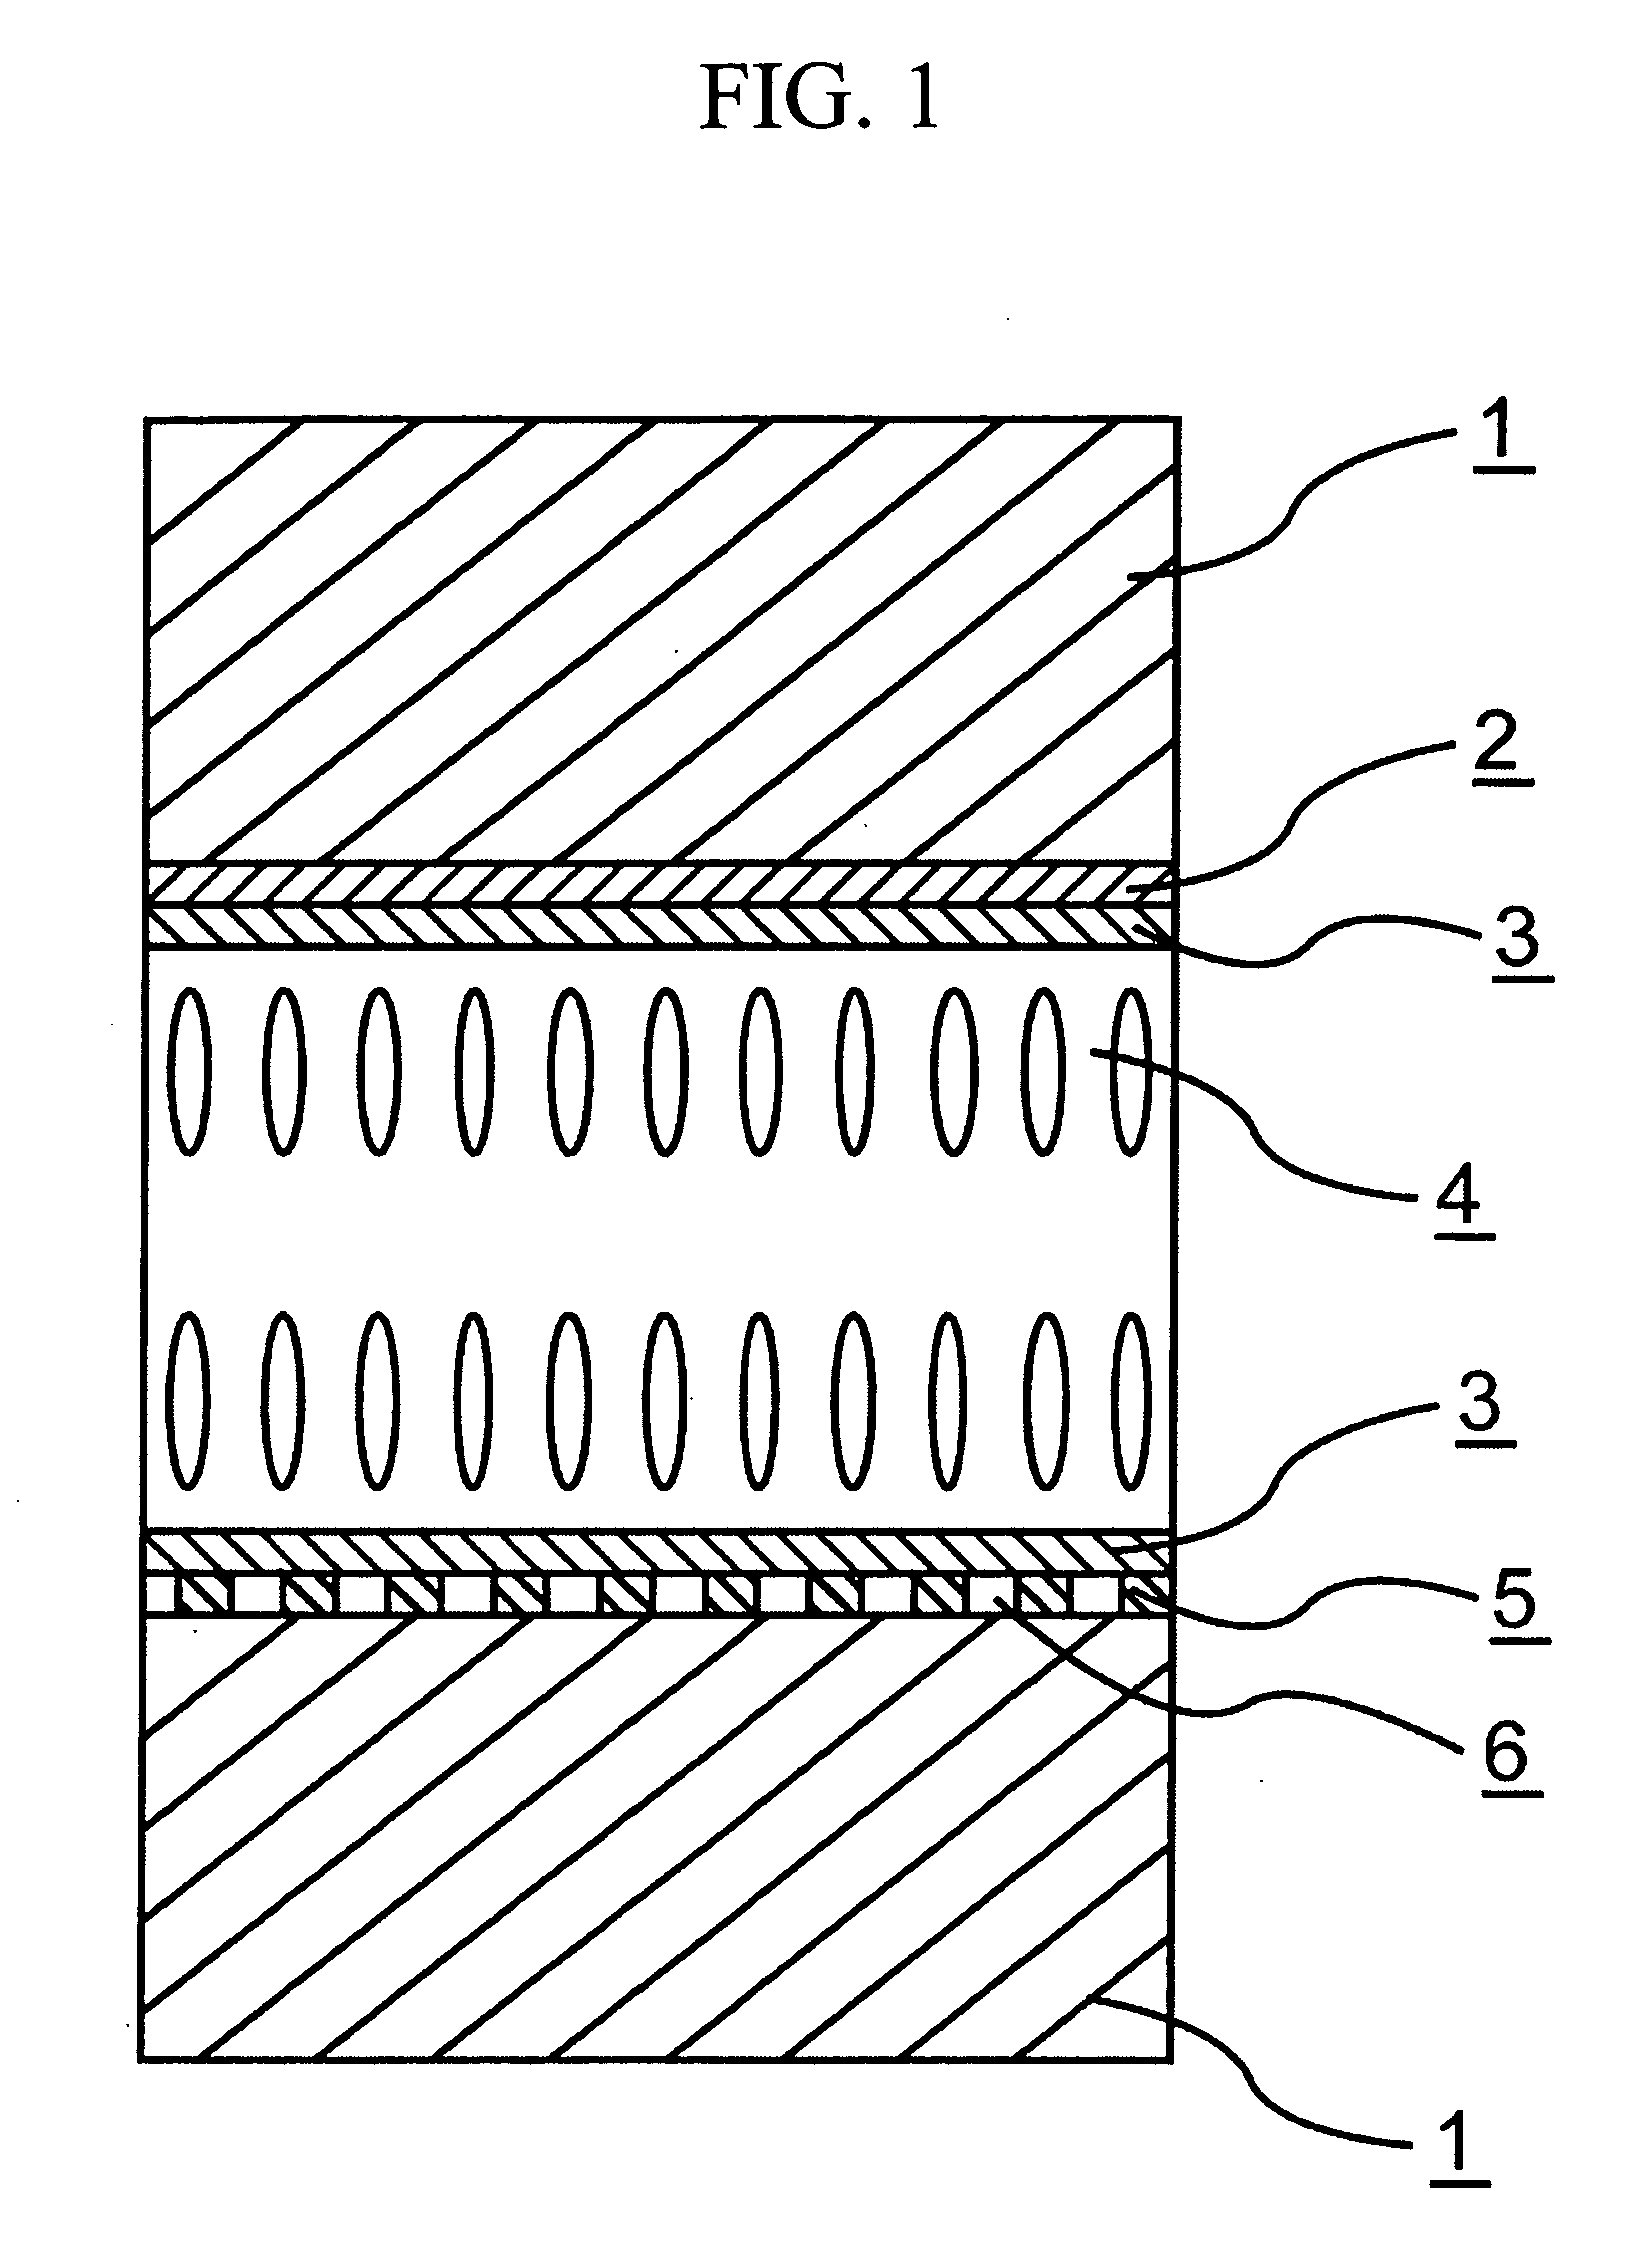 Chroman dervative and liquid-crystal composition containing the compound